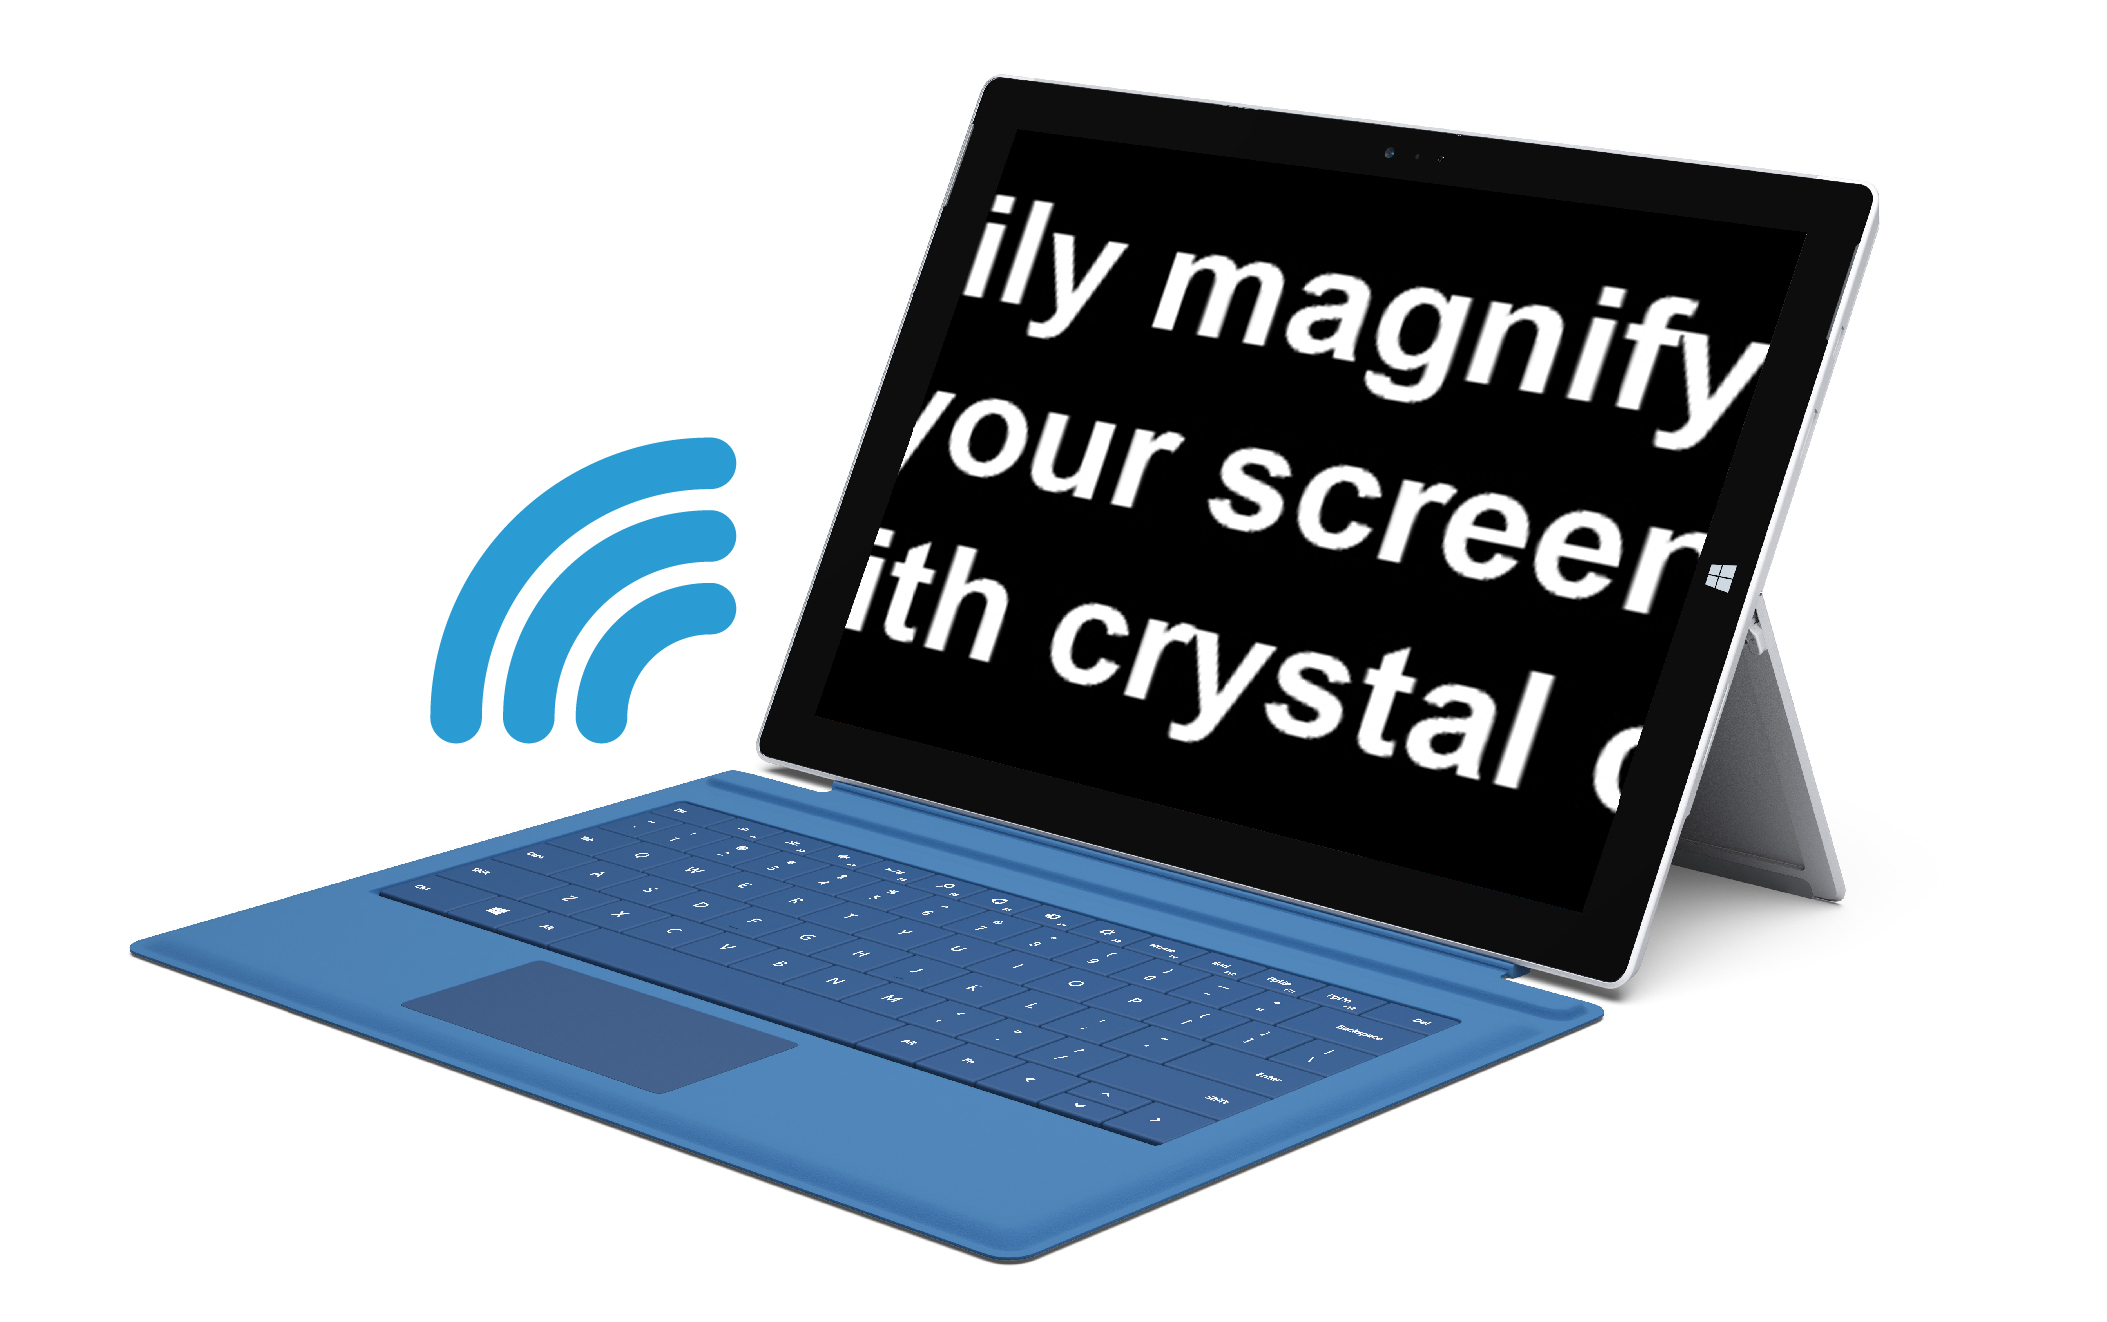 SuperNova magnifying text on a Surface Pro 3